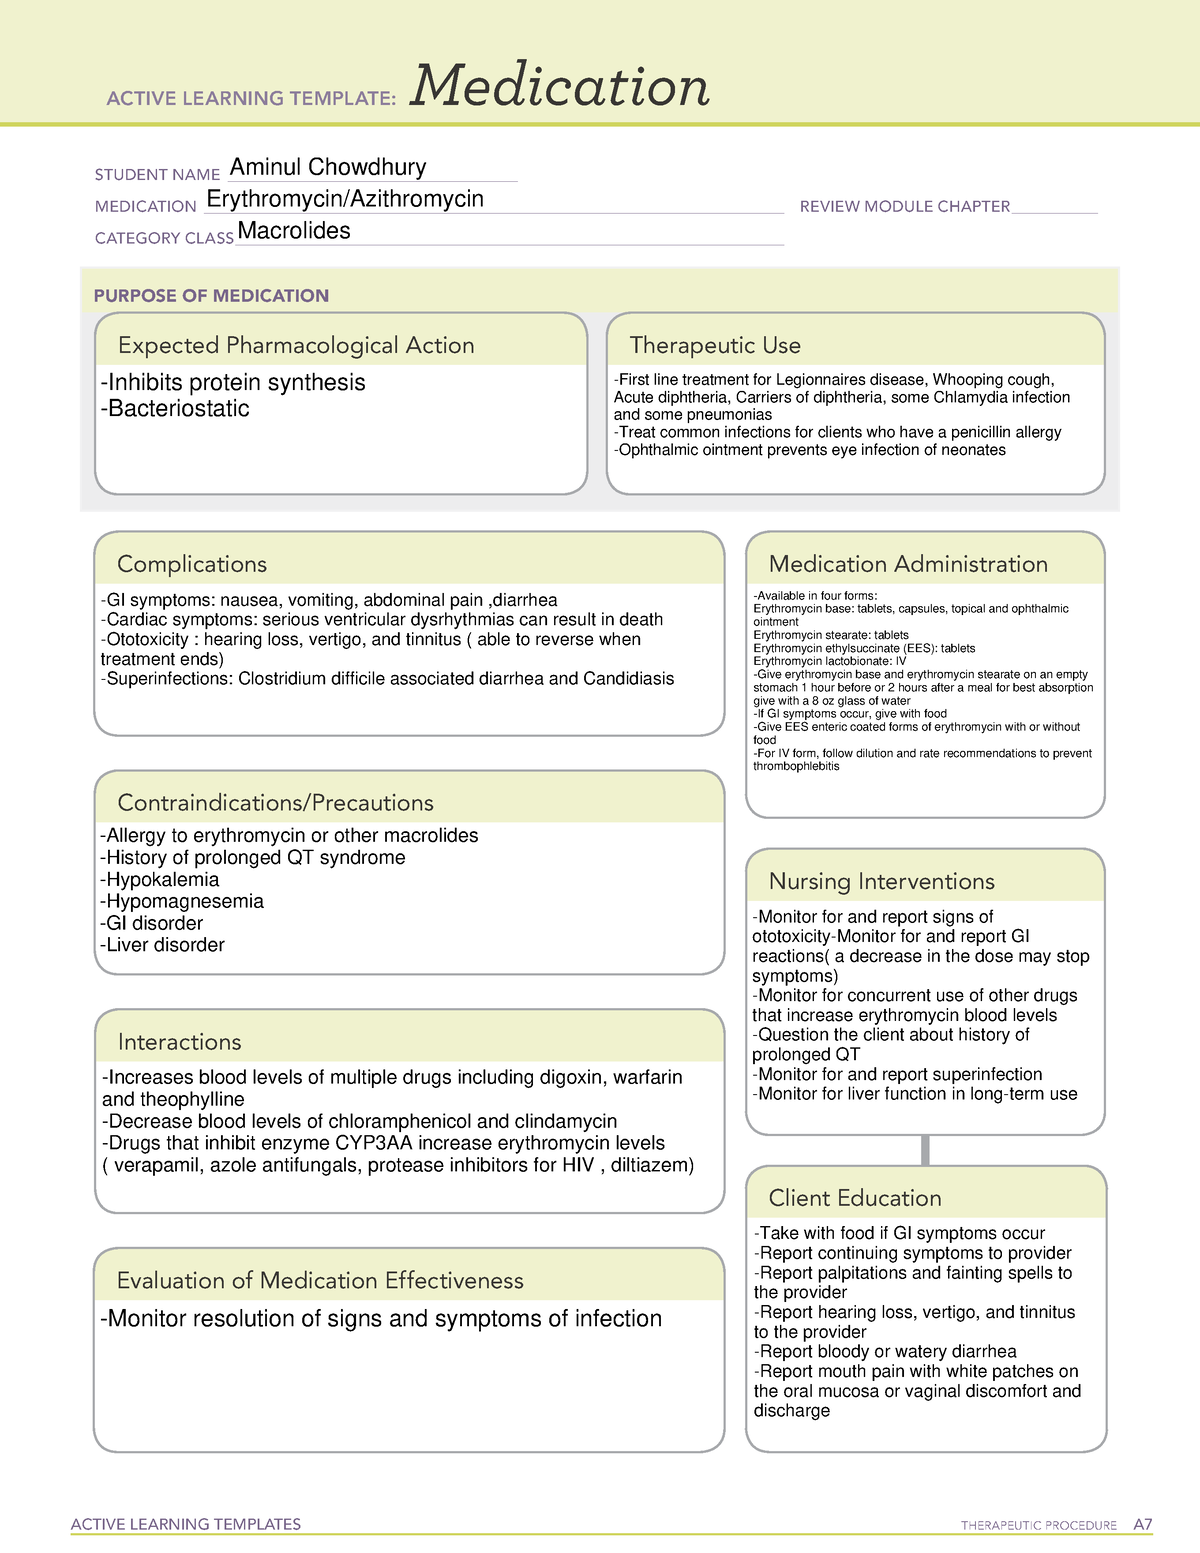 ErythromycinAzithromycin ACTIVE LEARNING TEMPLATES THERAPEUTIC